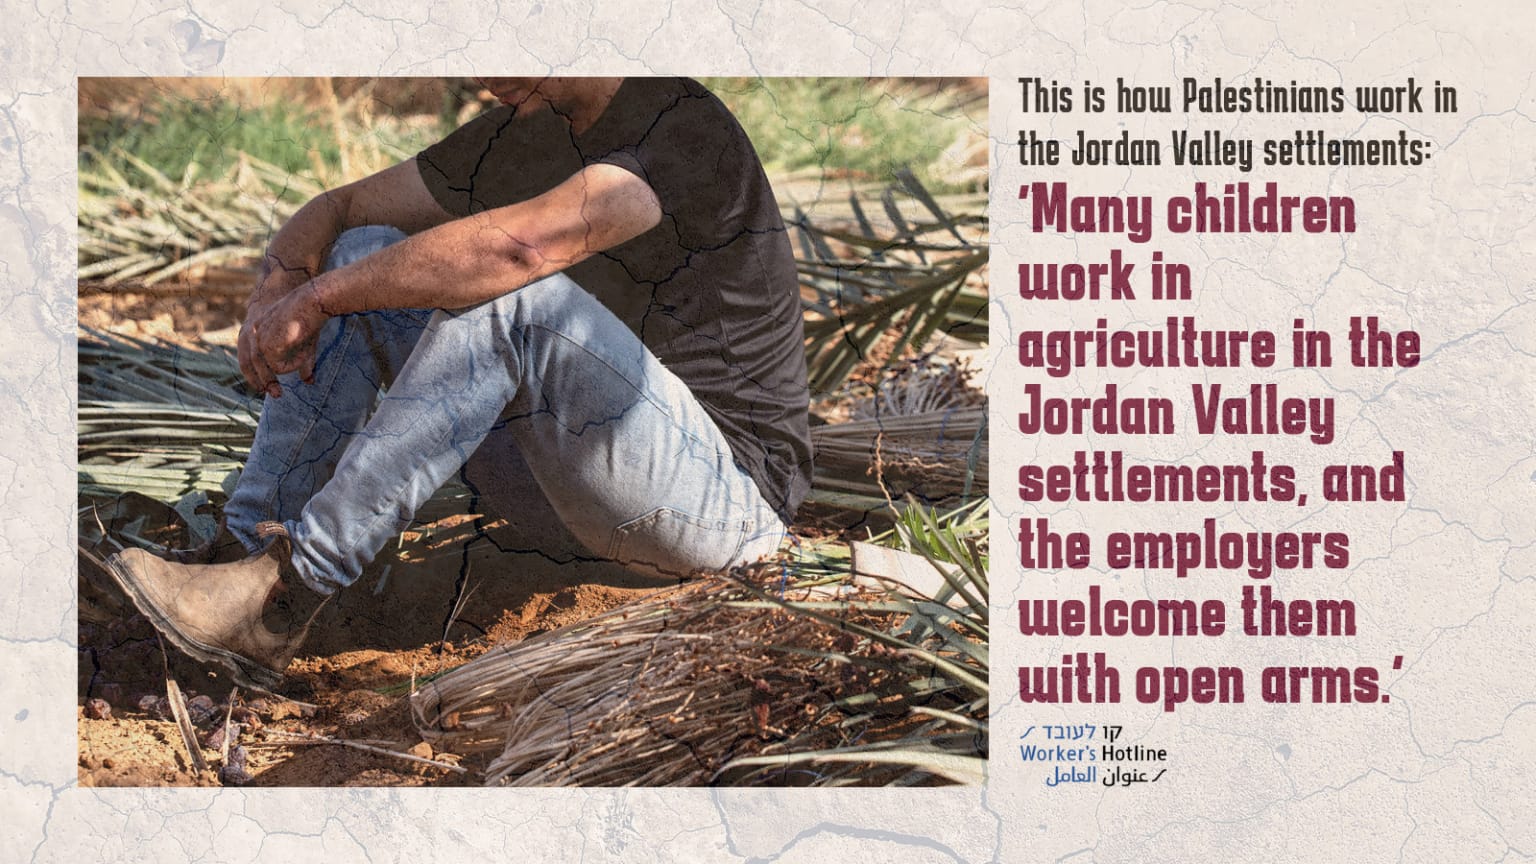 “Many children work in agriculture in the Jordan Valley settlements, and the employers welcome them with open arms”